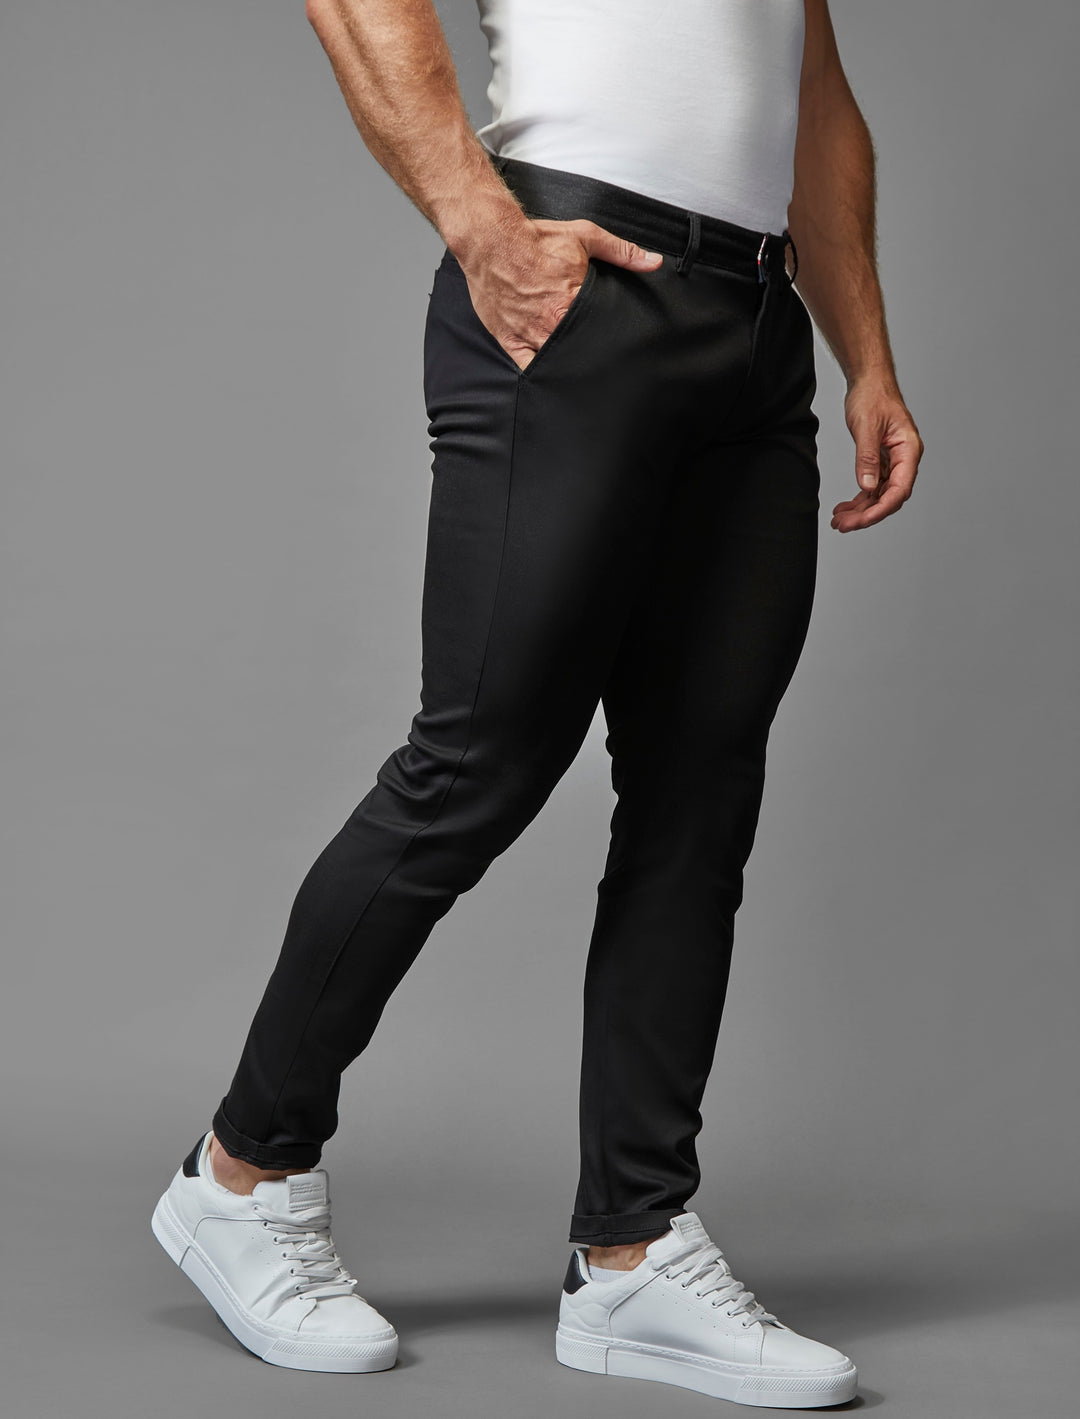 apered Menswear presents its black chinos, tailored in an athletic fit and enriched with stretch for ease.